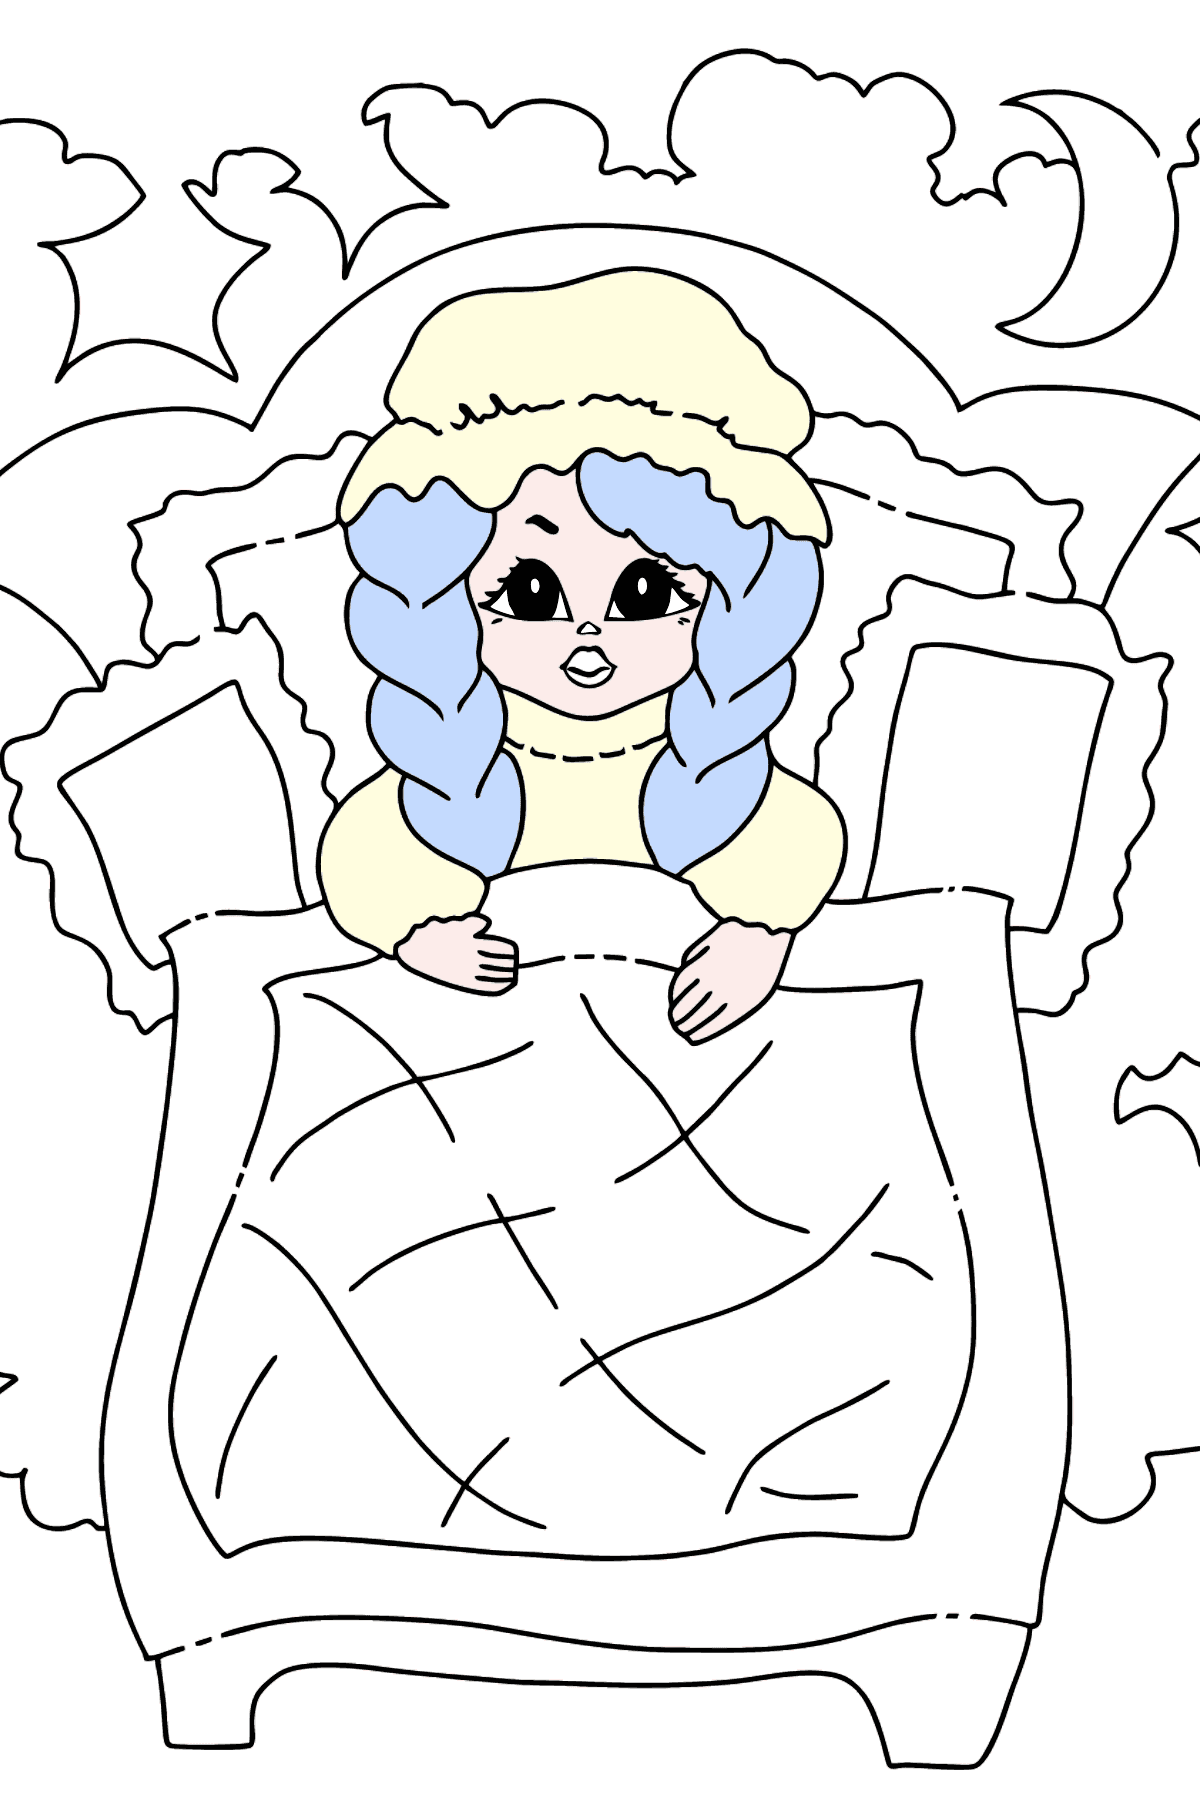 Kind princess coloring page (simple) - Coloring Pages for Kids